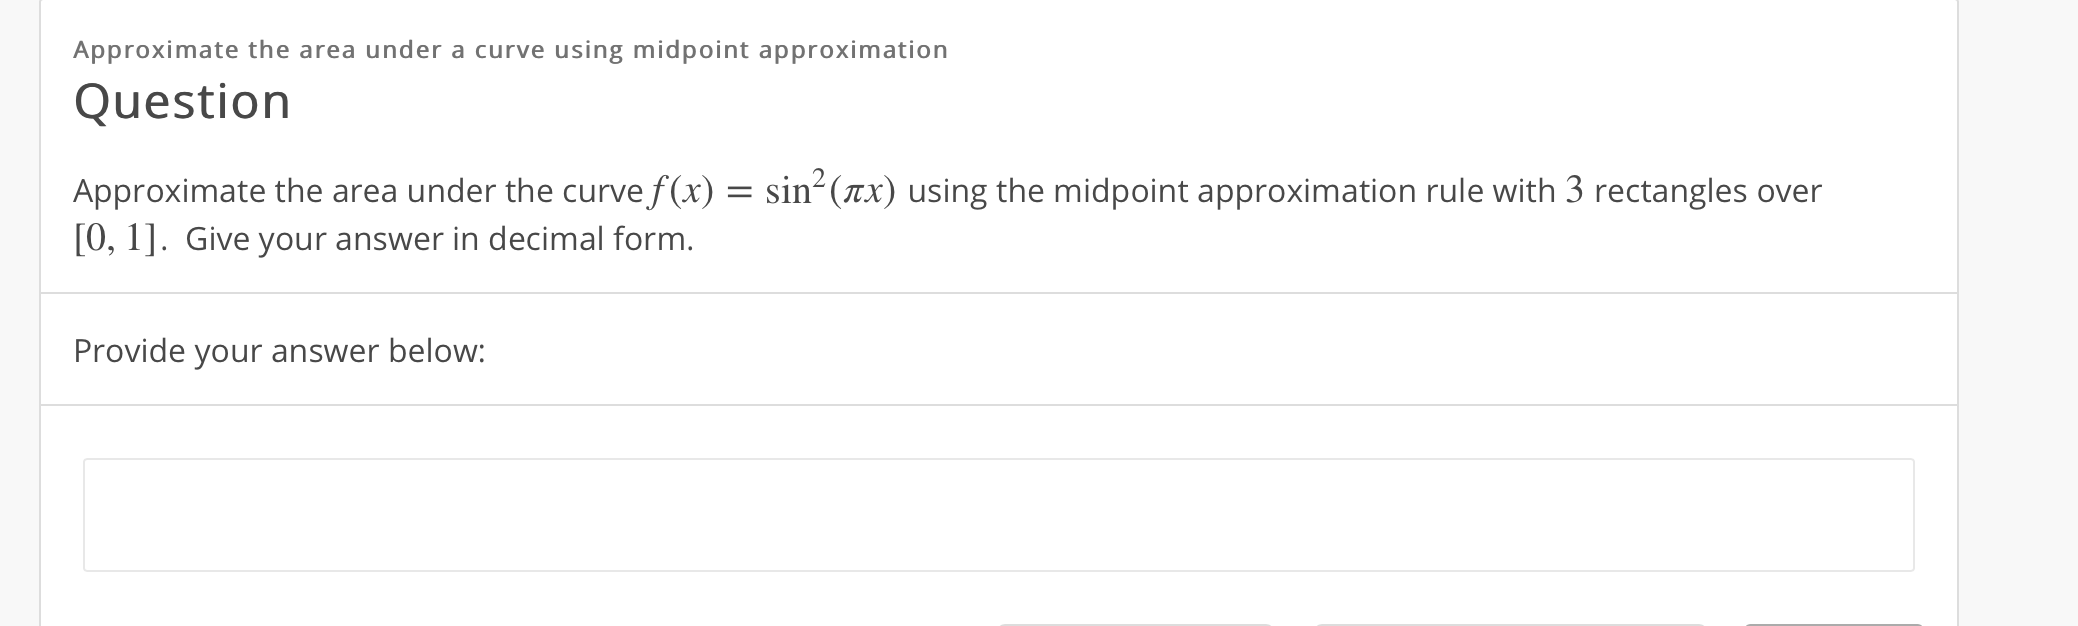 Approximate the area under a curve using midpoint approximation
Question
Approximate the area under the curve f(x) = sin- (ax) using the midpoint approximation rule with 3 rectangles over
[0, 1]. Give your answer in decimal form.
Provide your answer below:
